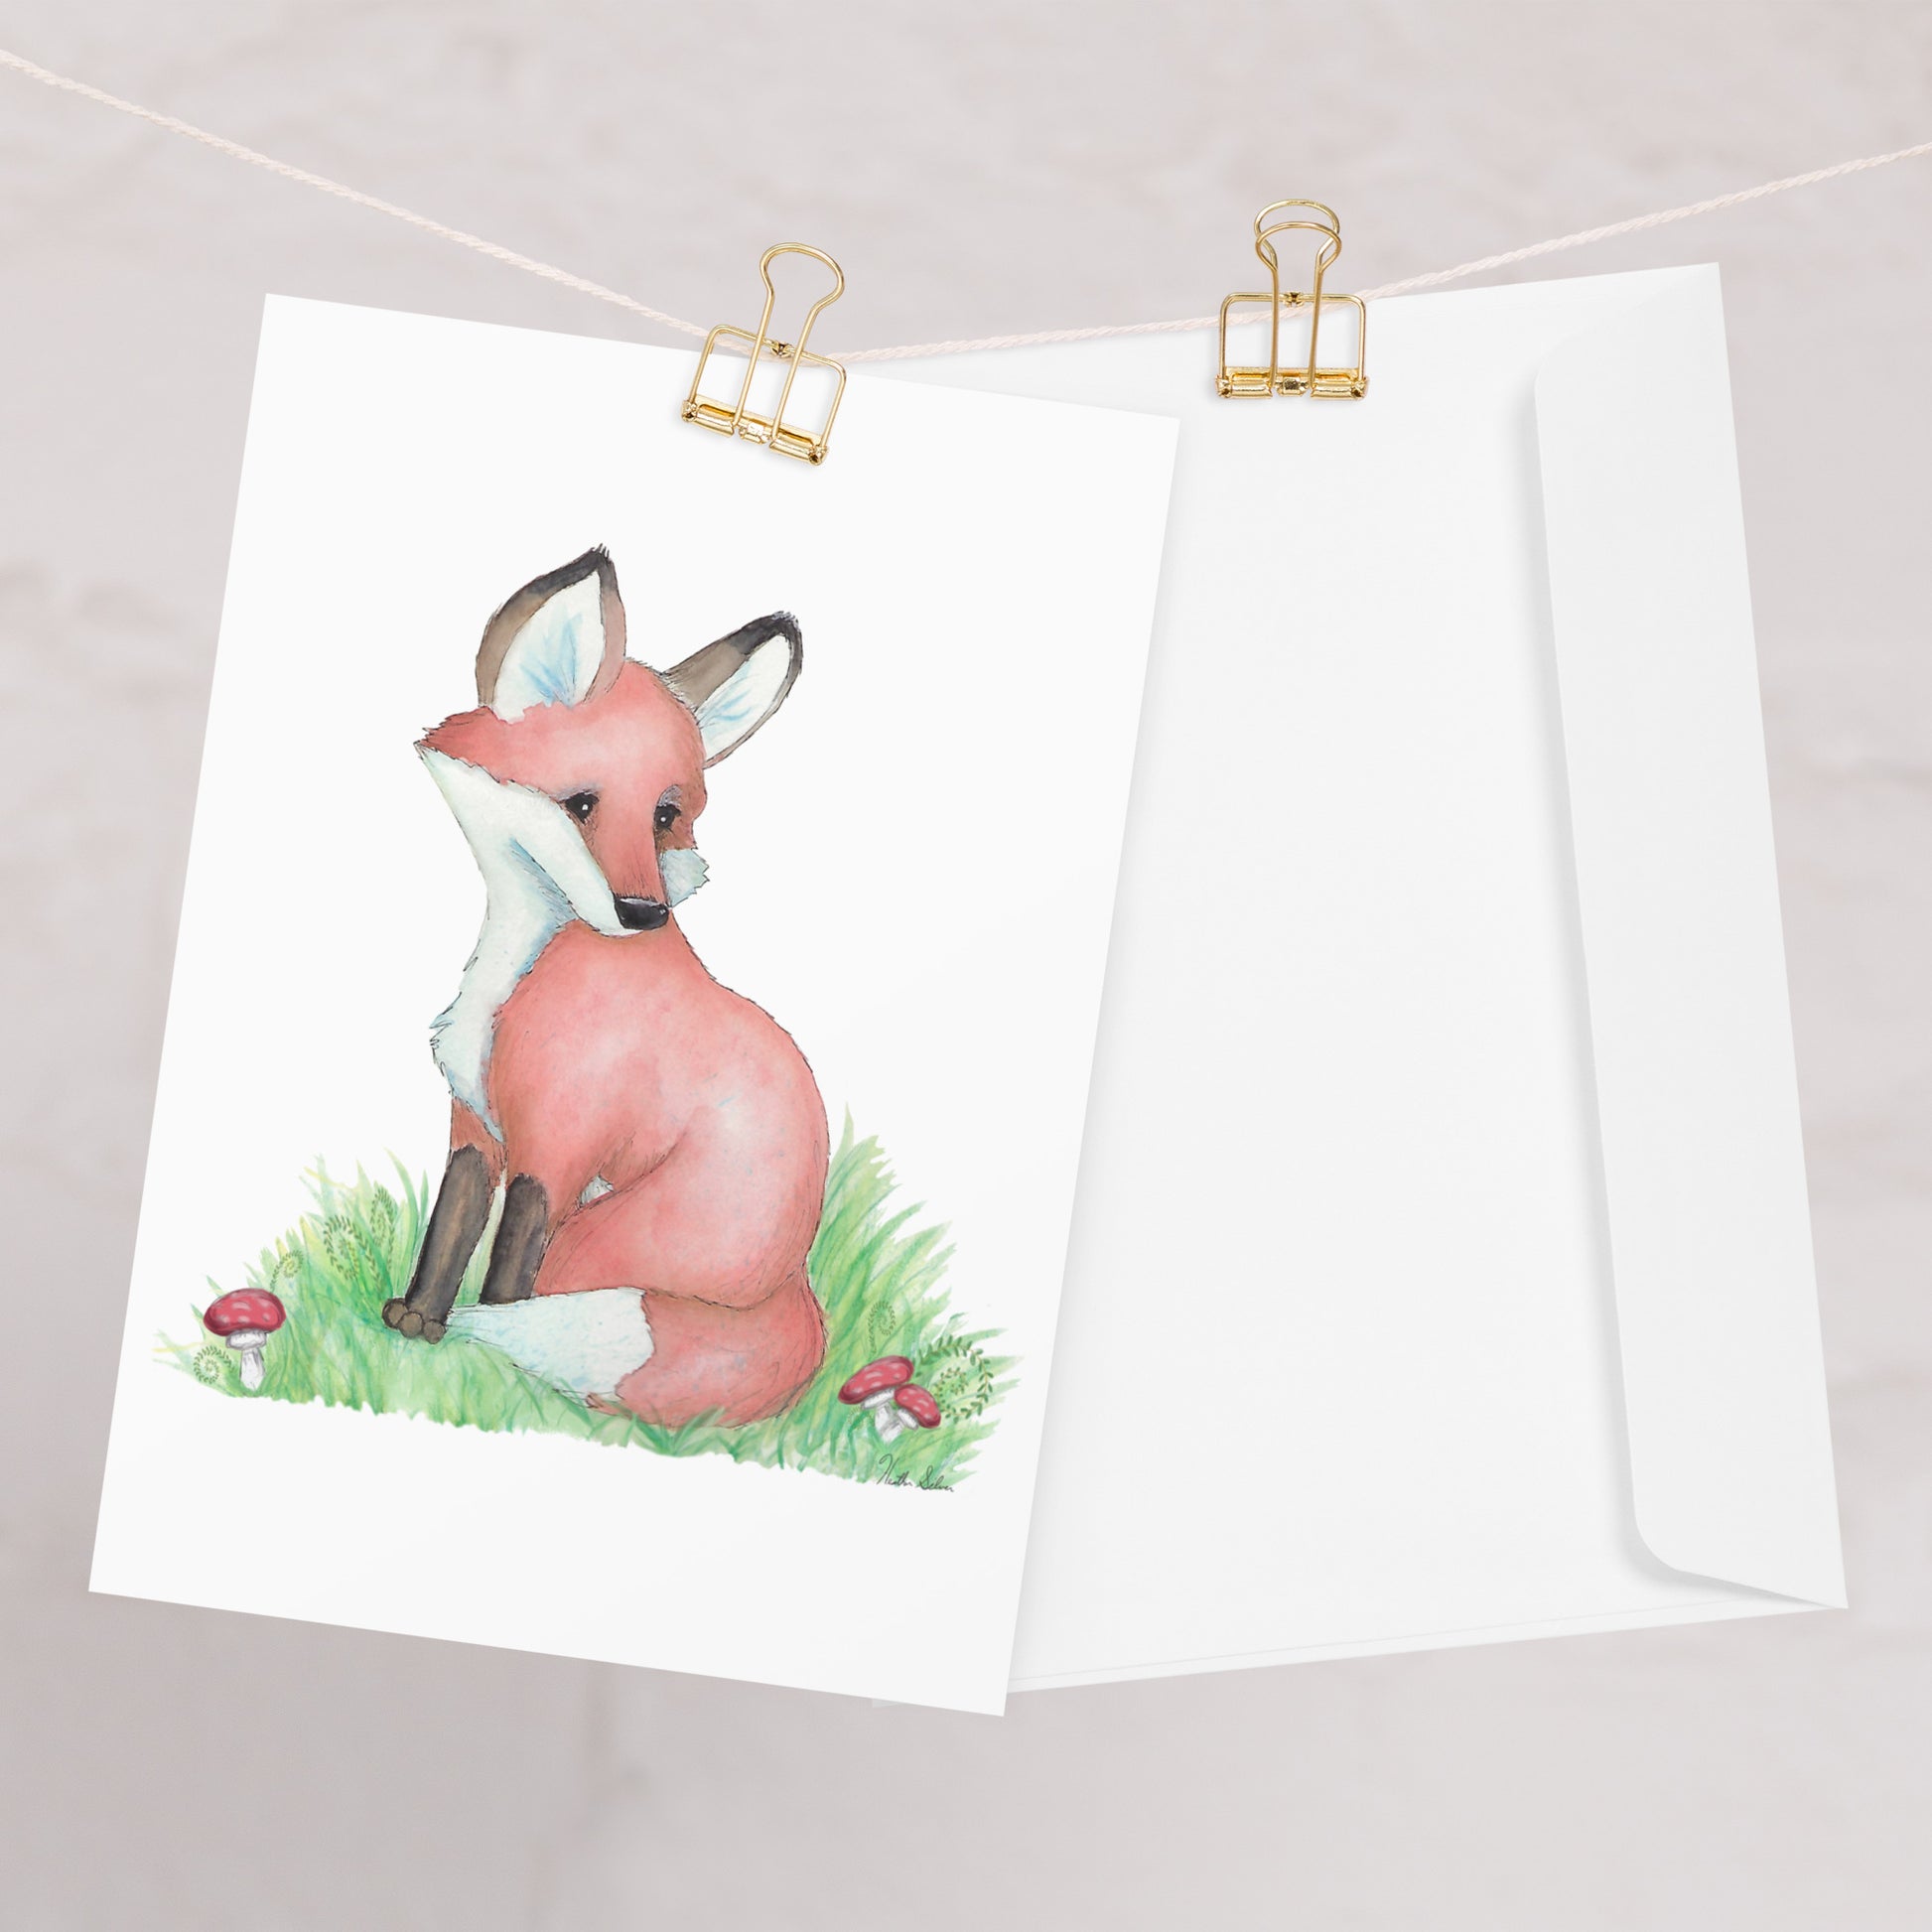 Pack of ten 5.5 x 8.5 inch greeting cards with envelopes. Front of card has watercolor fox nestled in the grass by mushrooms and ferns. Inside is blank. Cards are 130 lb 350 gsm coated paperboard with vibrant printing.  One card shown on clothesline with a white envelope.